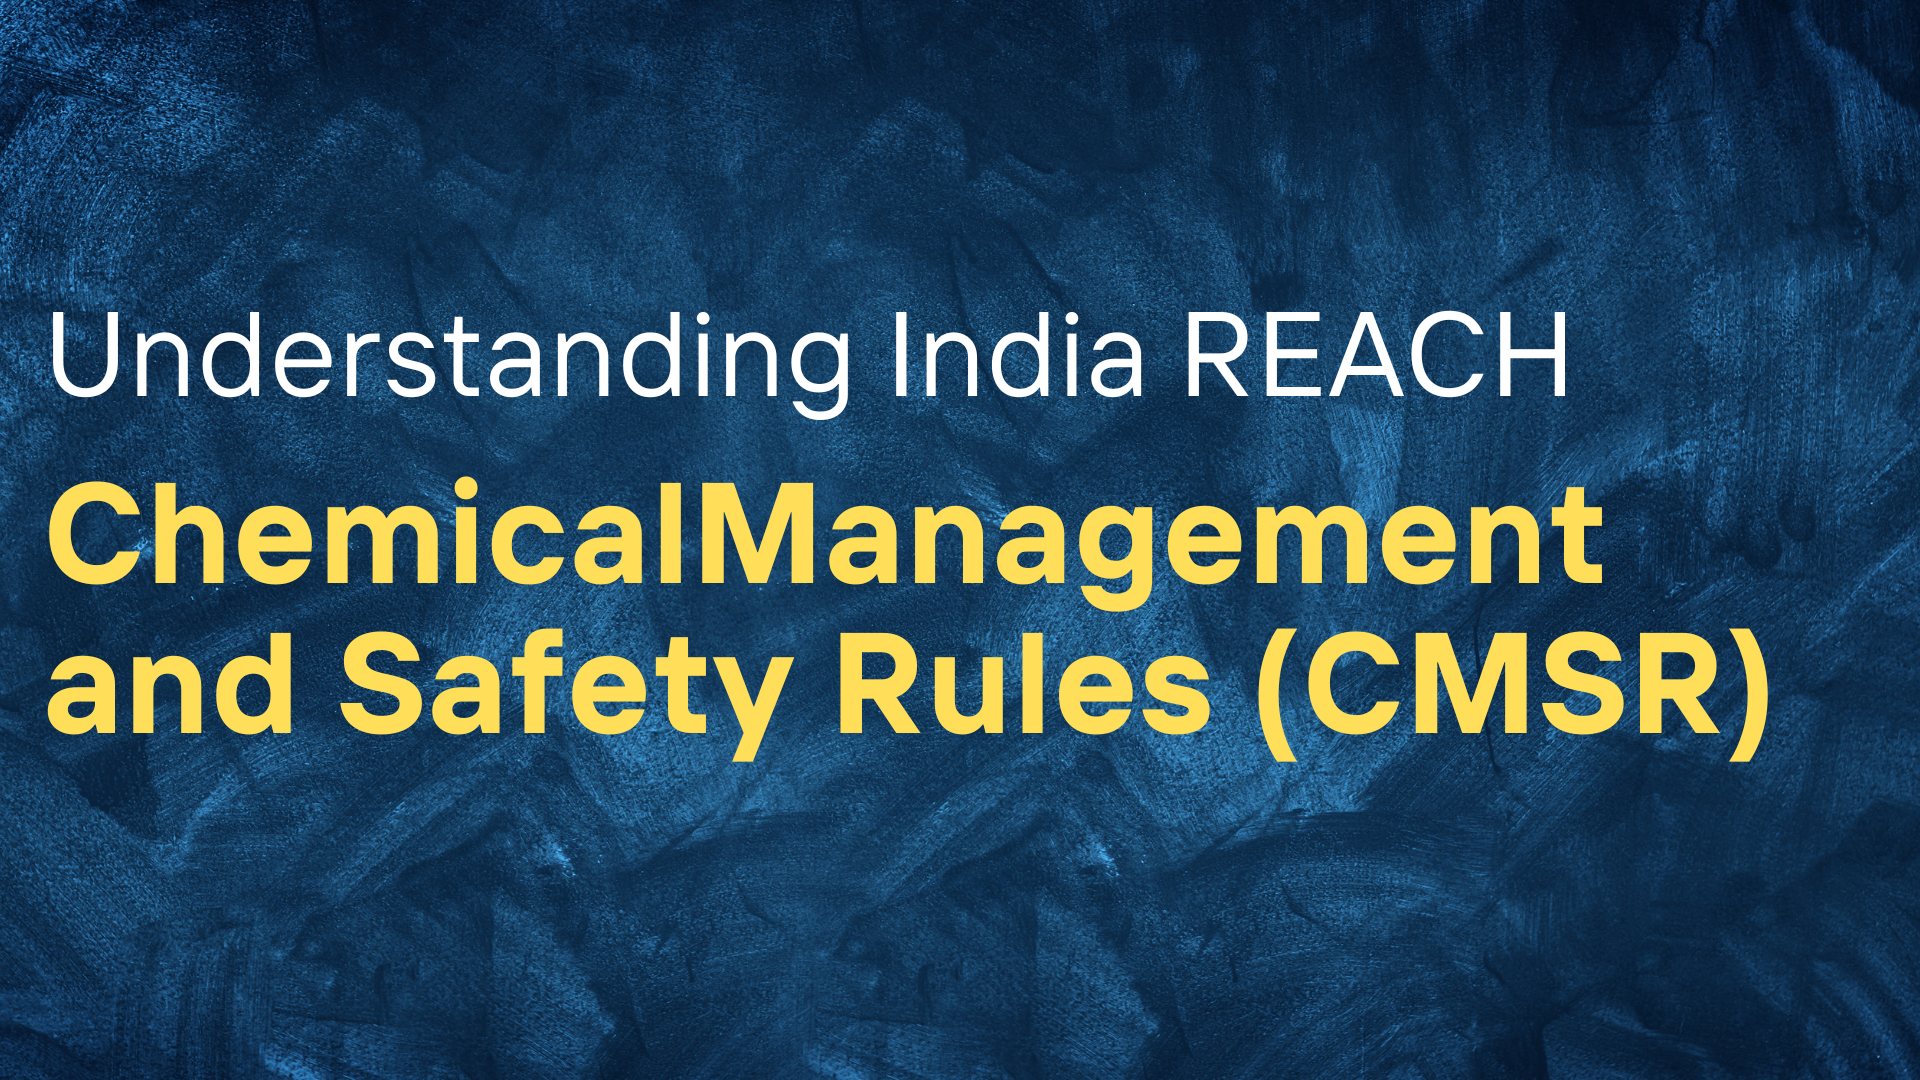 Understanding India REACH: Chemical Management and Safety Rules (CMSR)